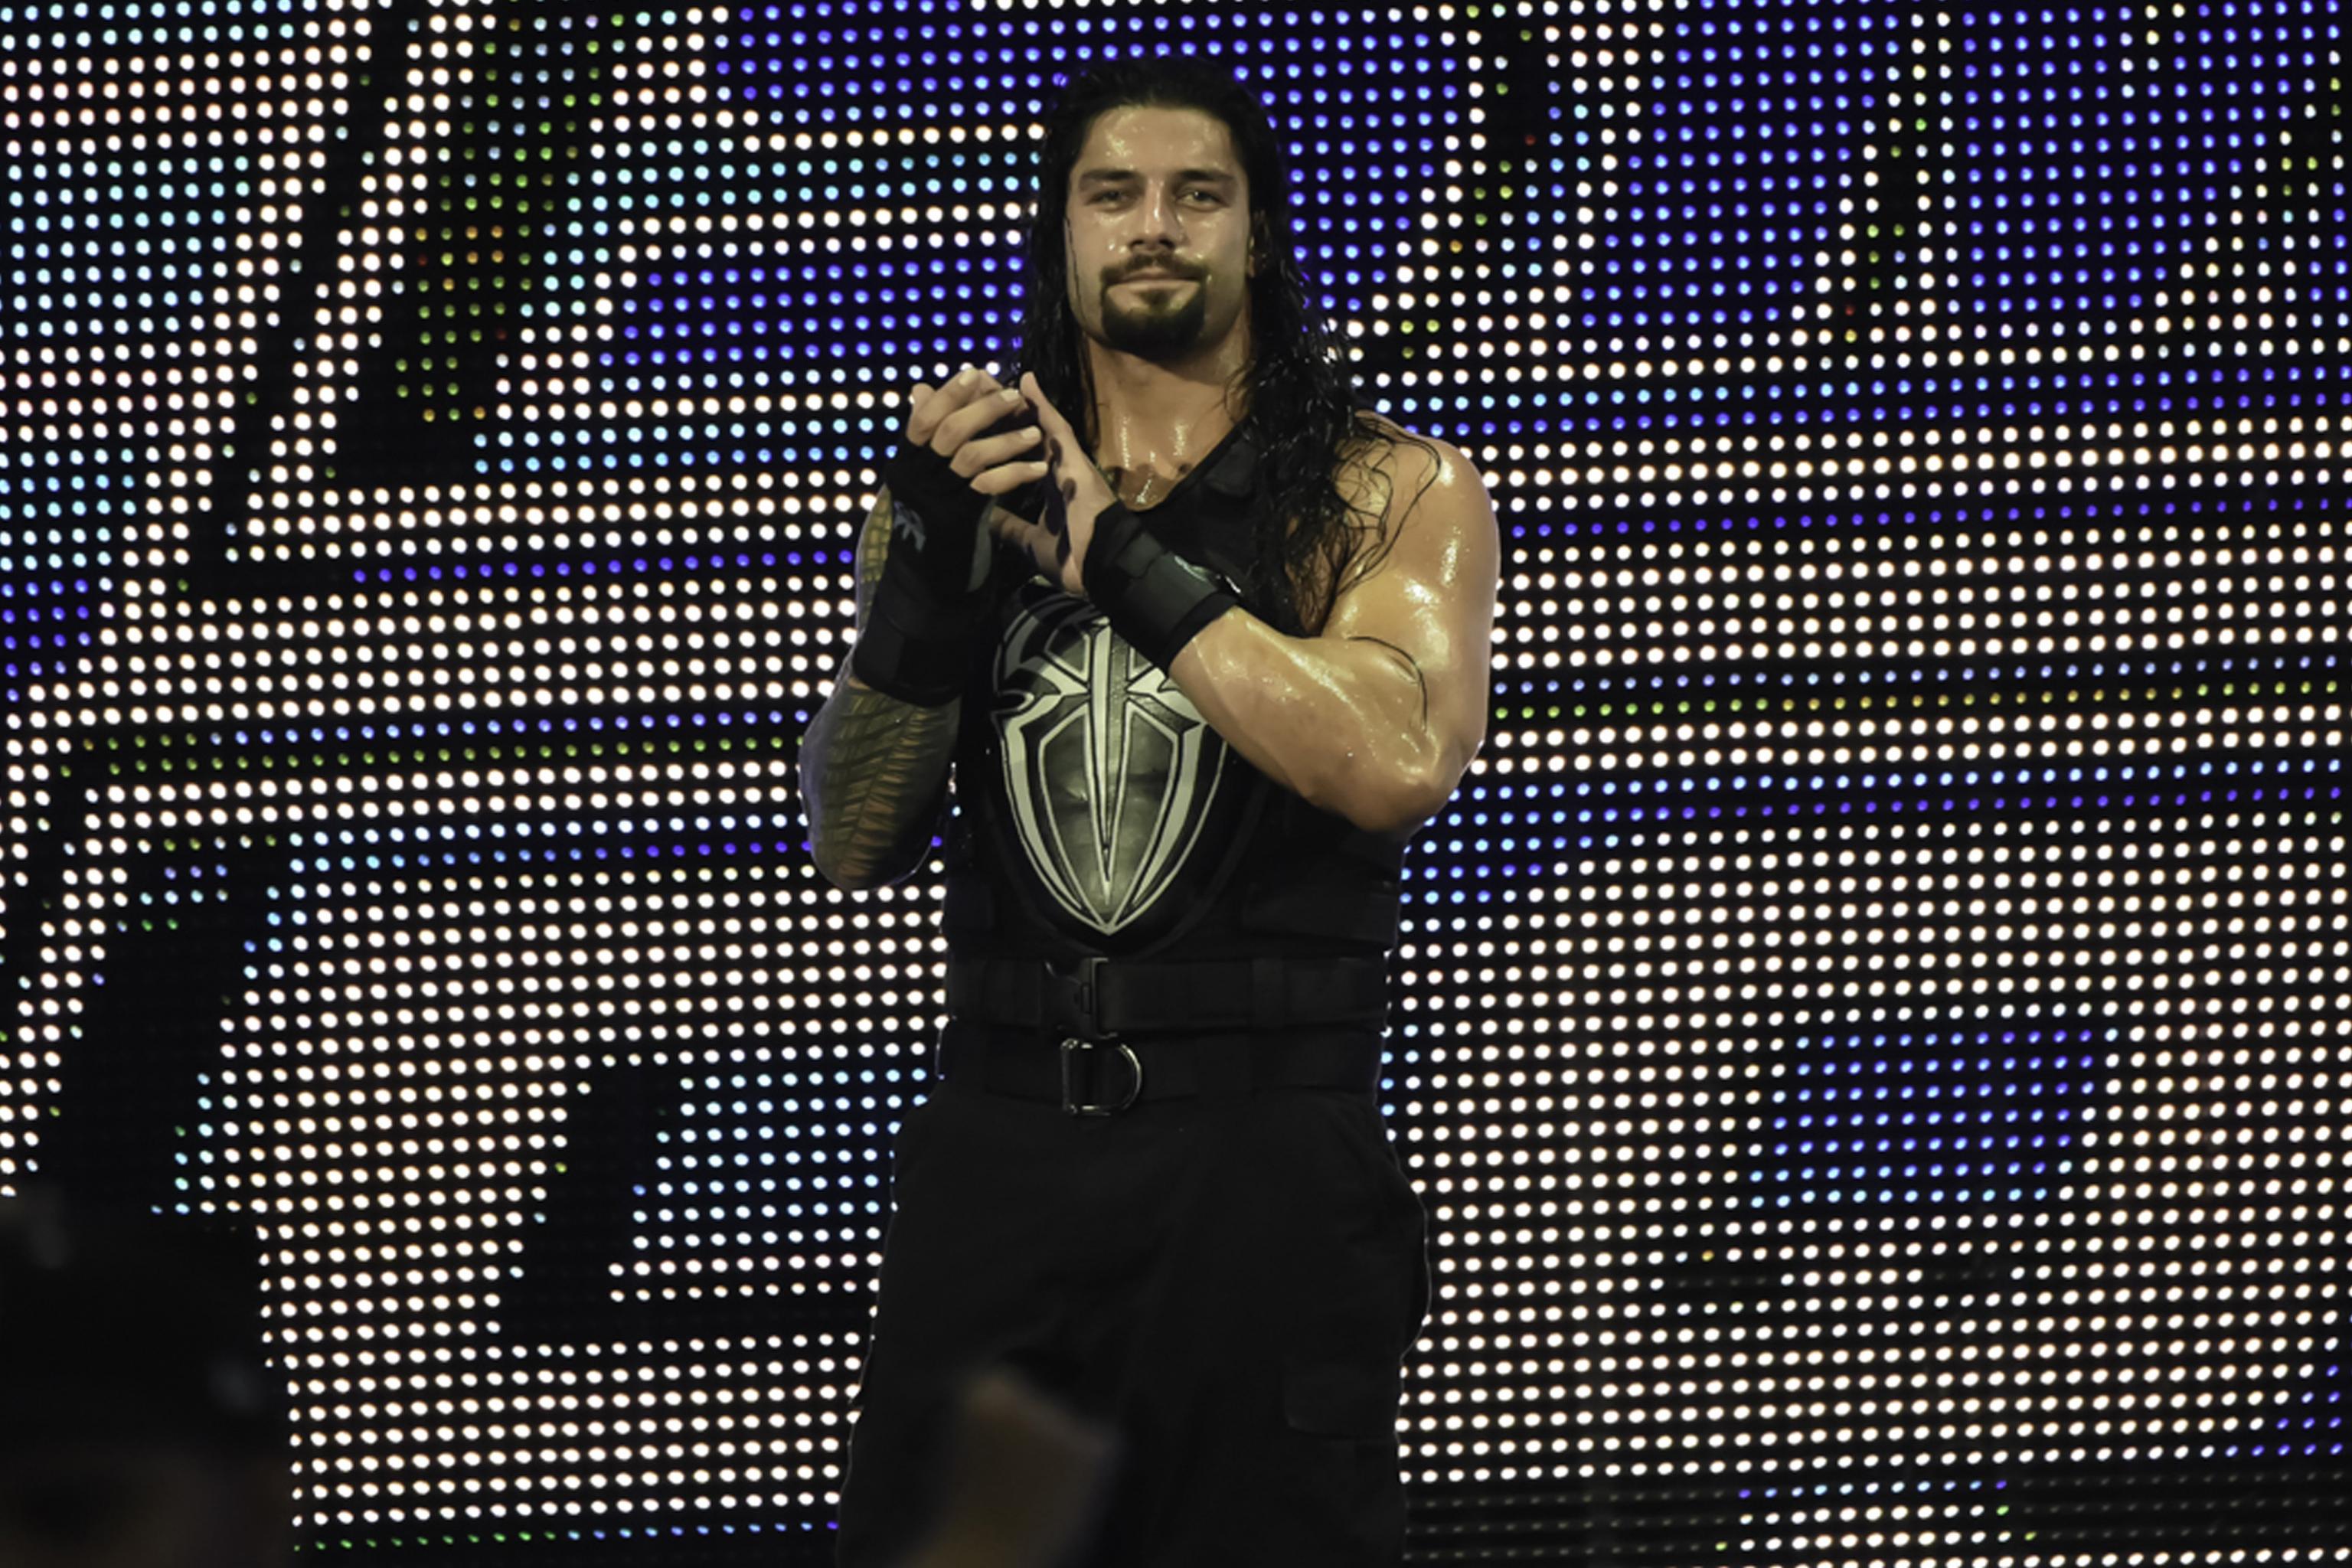 Video Roman Reigns Confirms Exit From Wwe Wrestlemania 36 Match